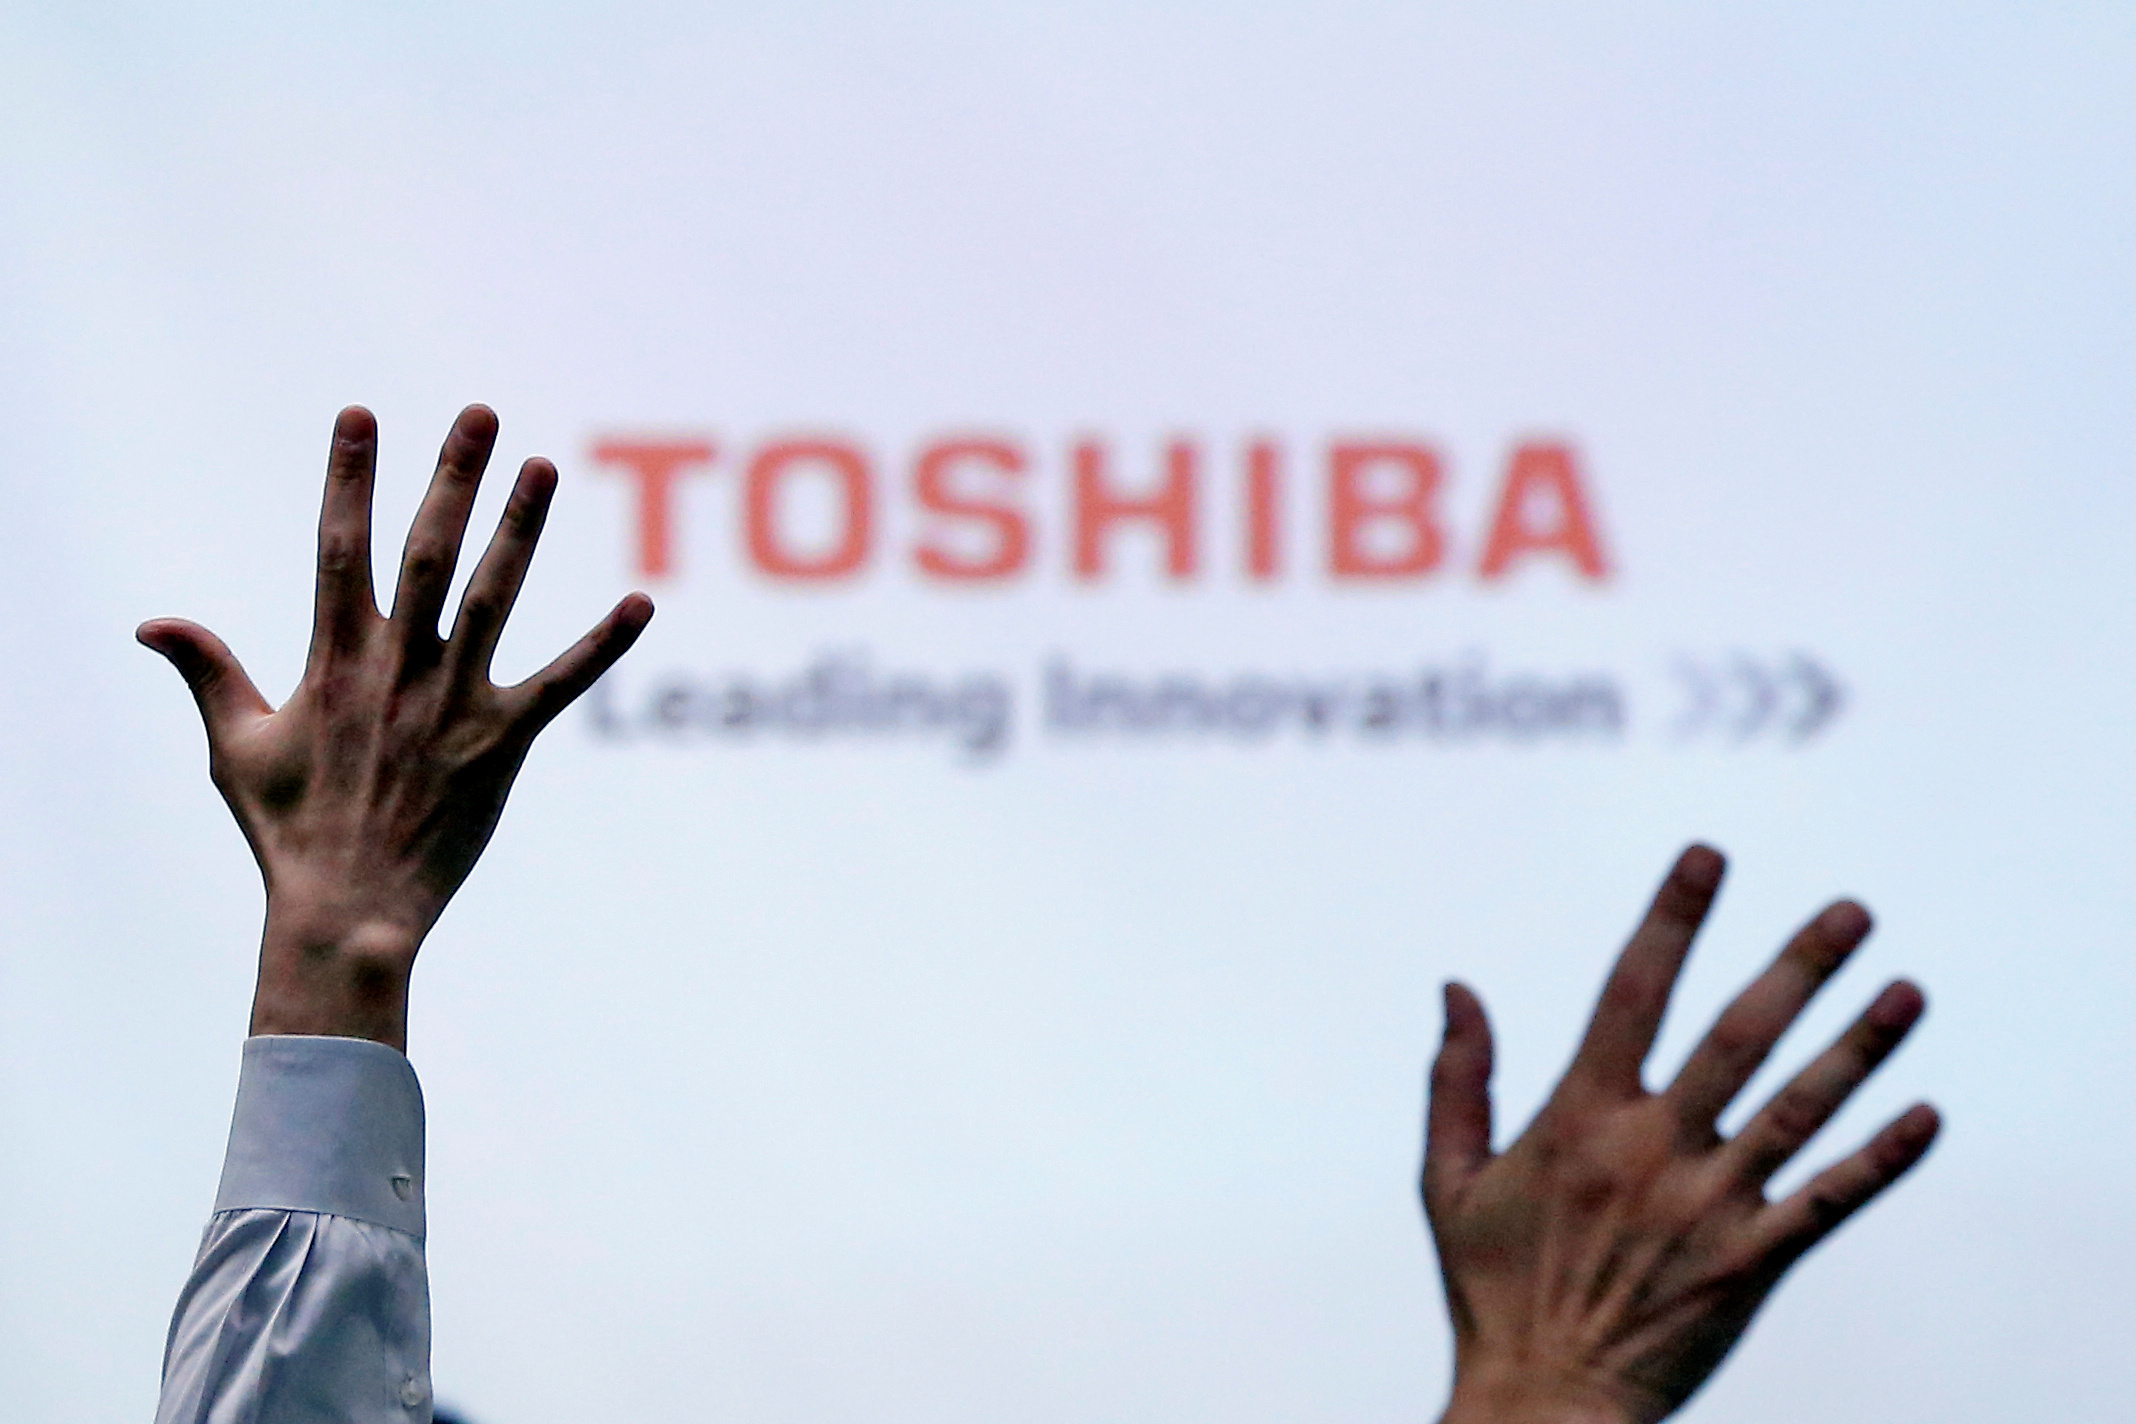 Reporters raise their hands for a question during a news conference by Toshiba Corp CEO Satoshi Tsunakawa at the company headquarters in Tokyo